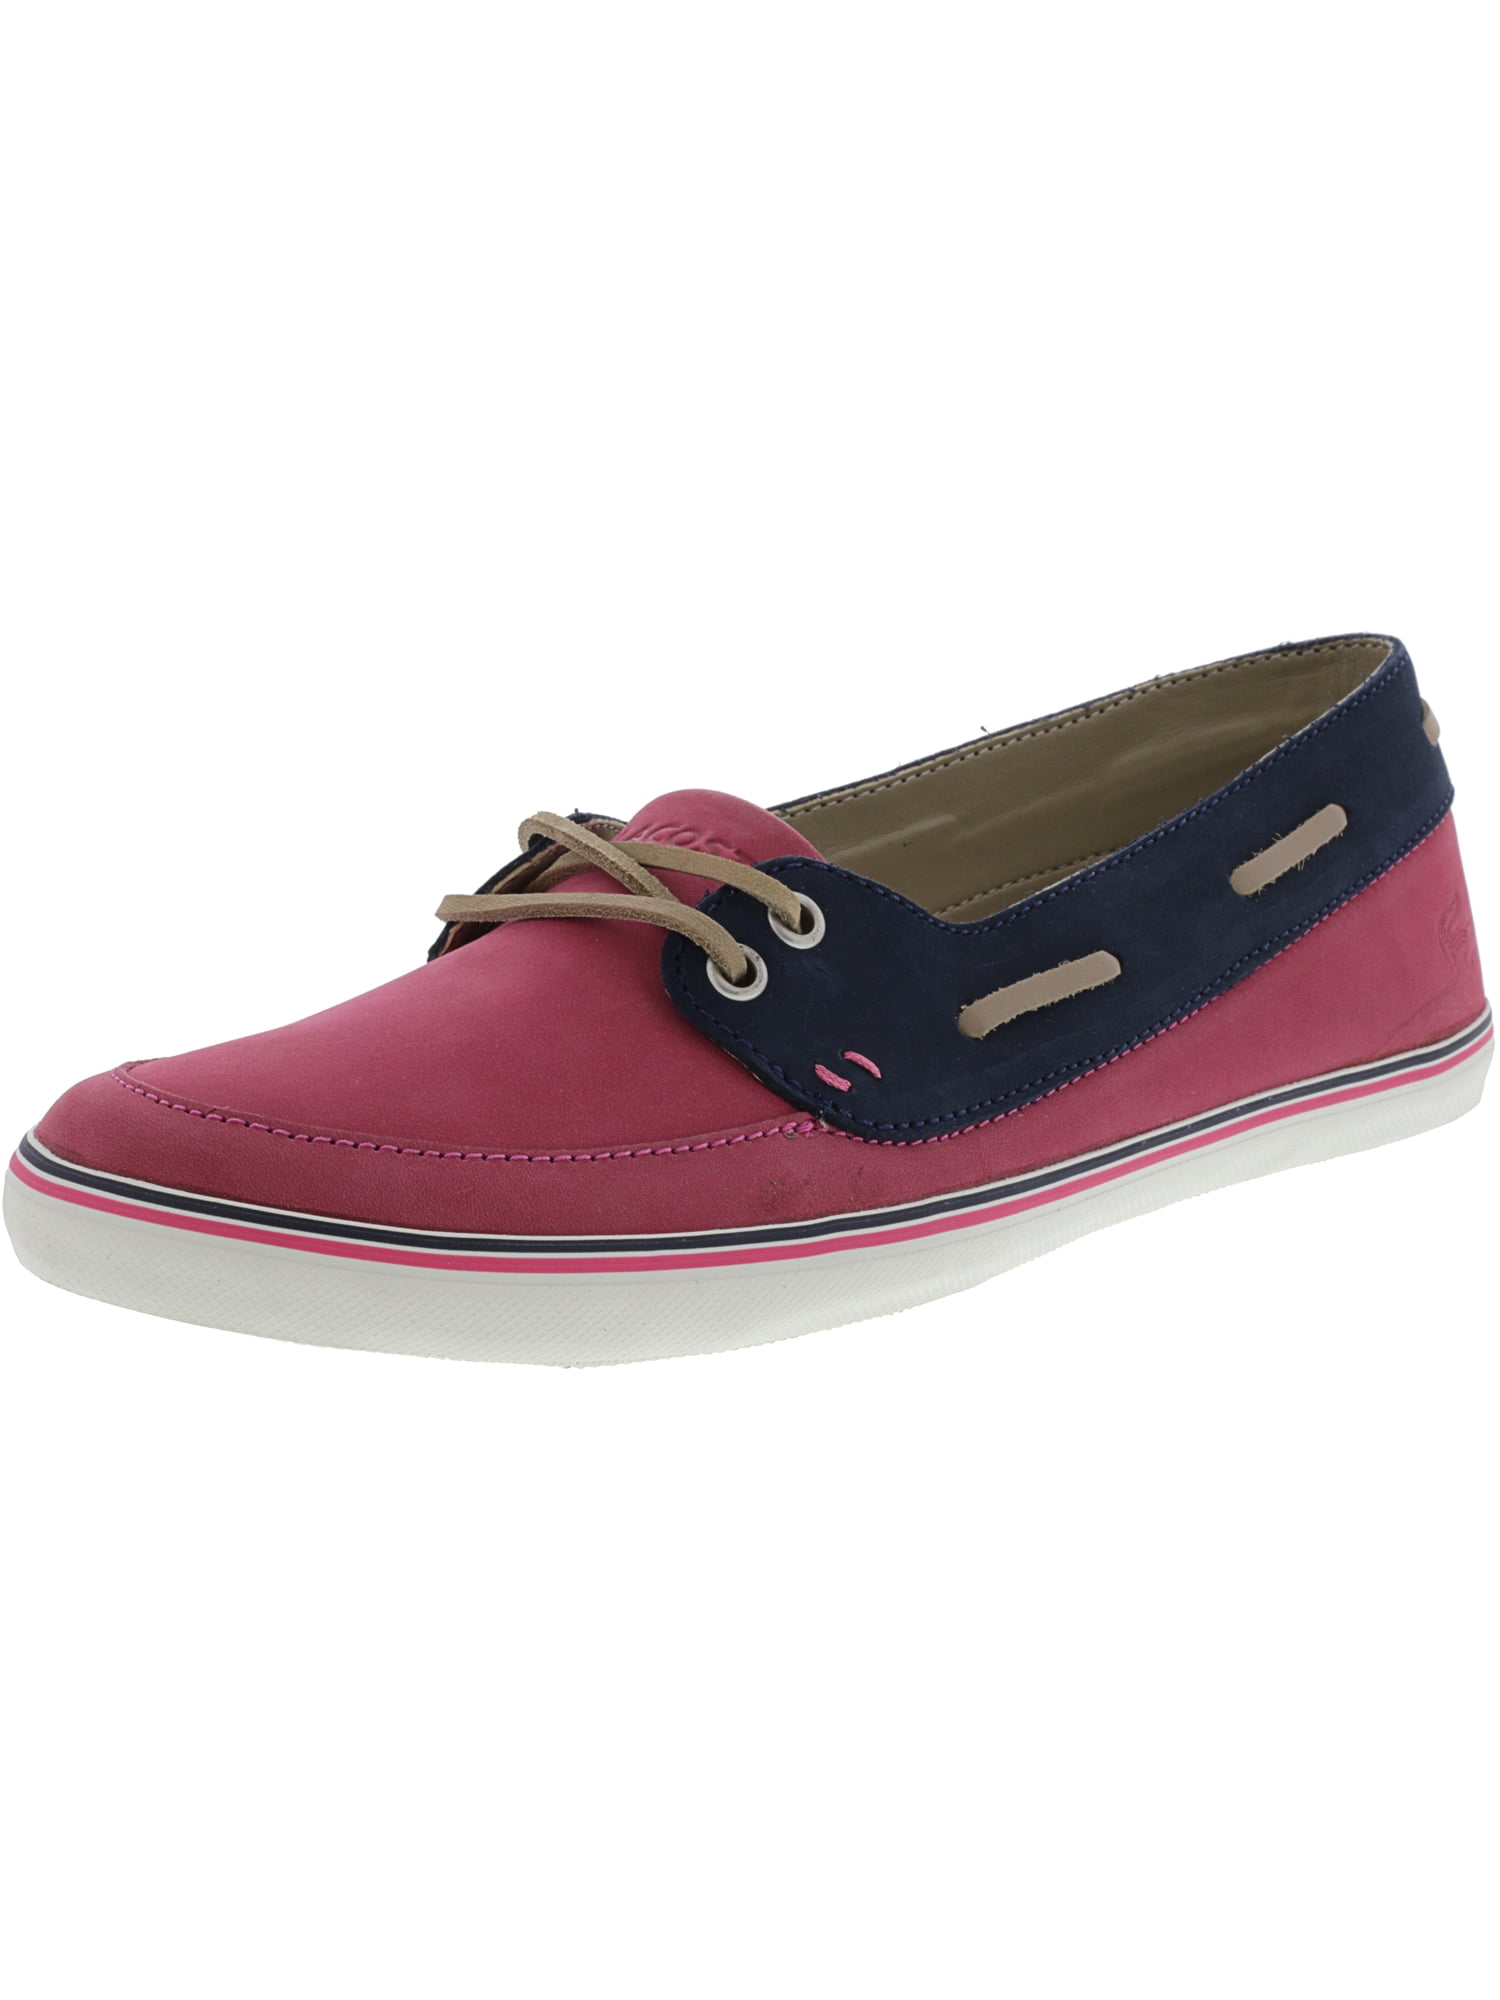 lacoste rubber shoes for women